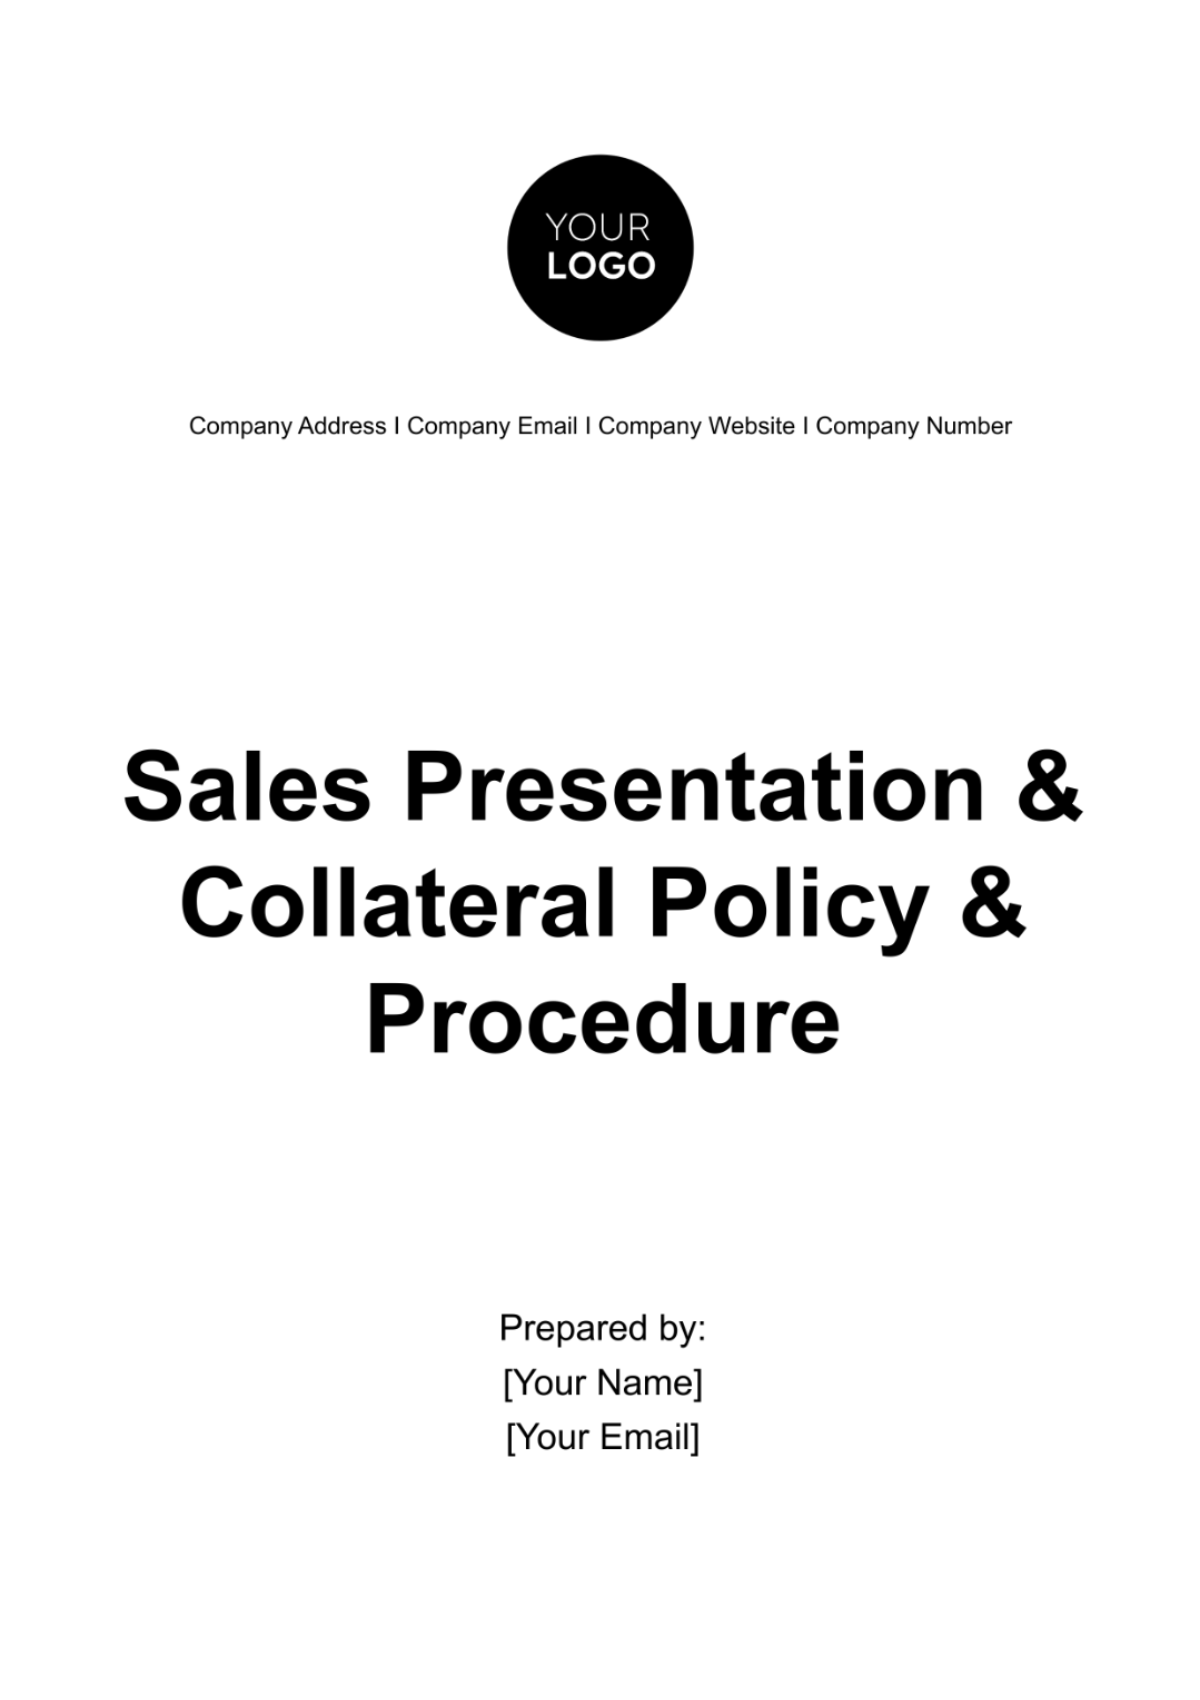 Free Sales Presentation & Collateral Policy & Procedure Template